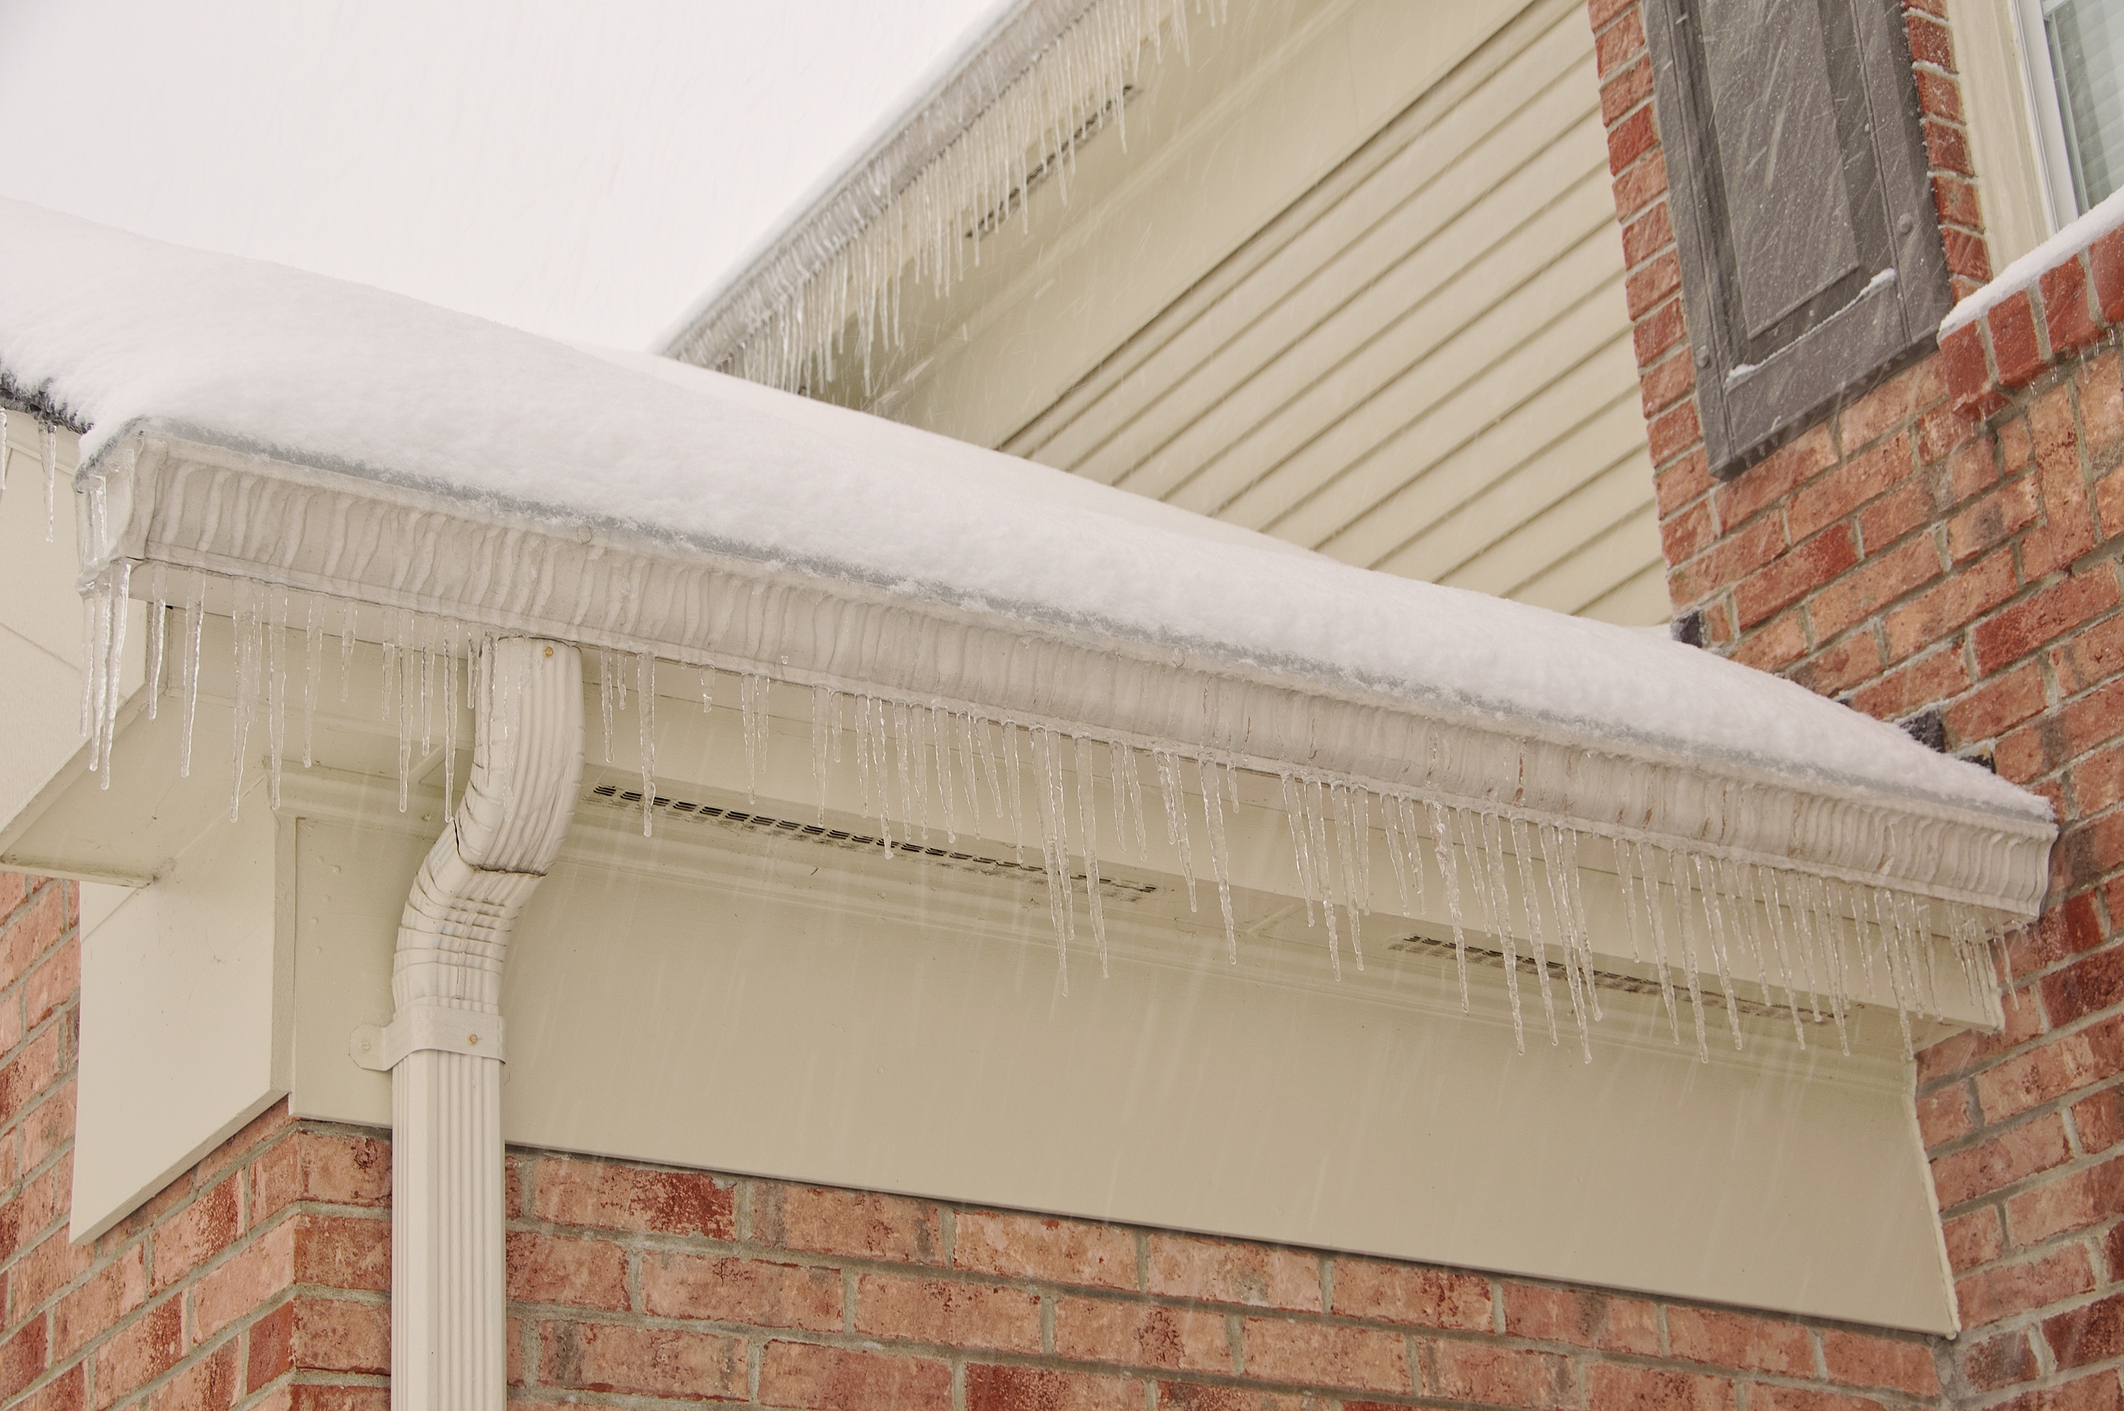 Ice buildup can cause roof leaks or roof rot. Protect your house from winter roof damage with Harford Roofing and Exteriors.